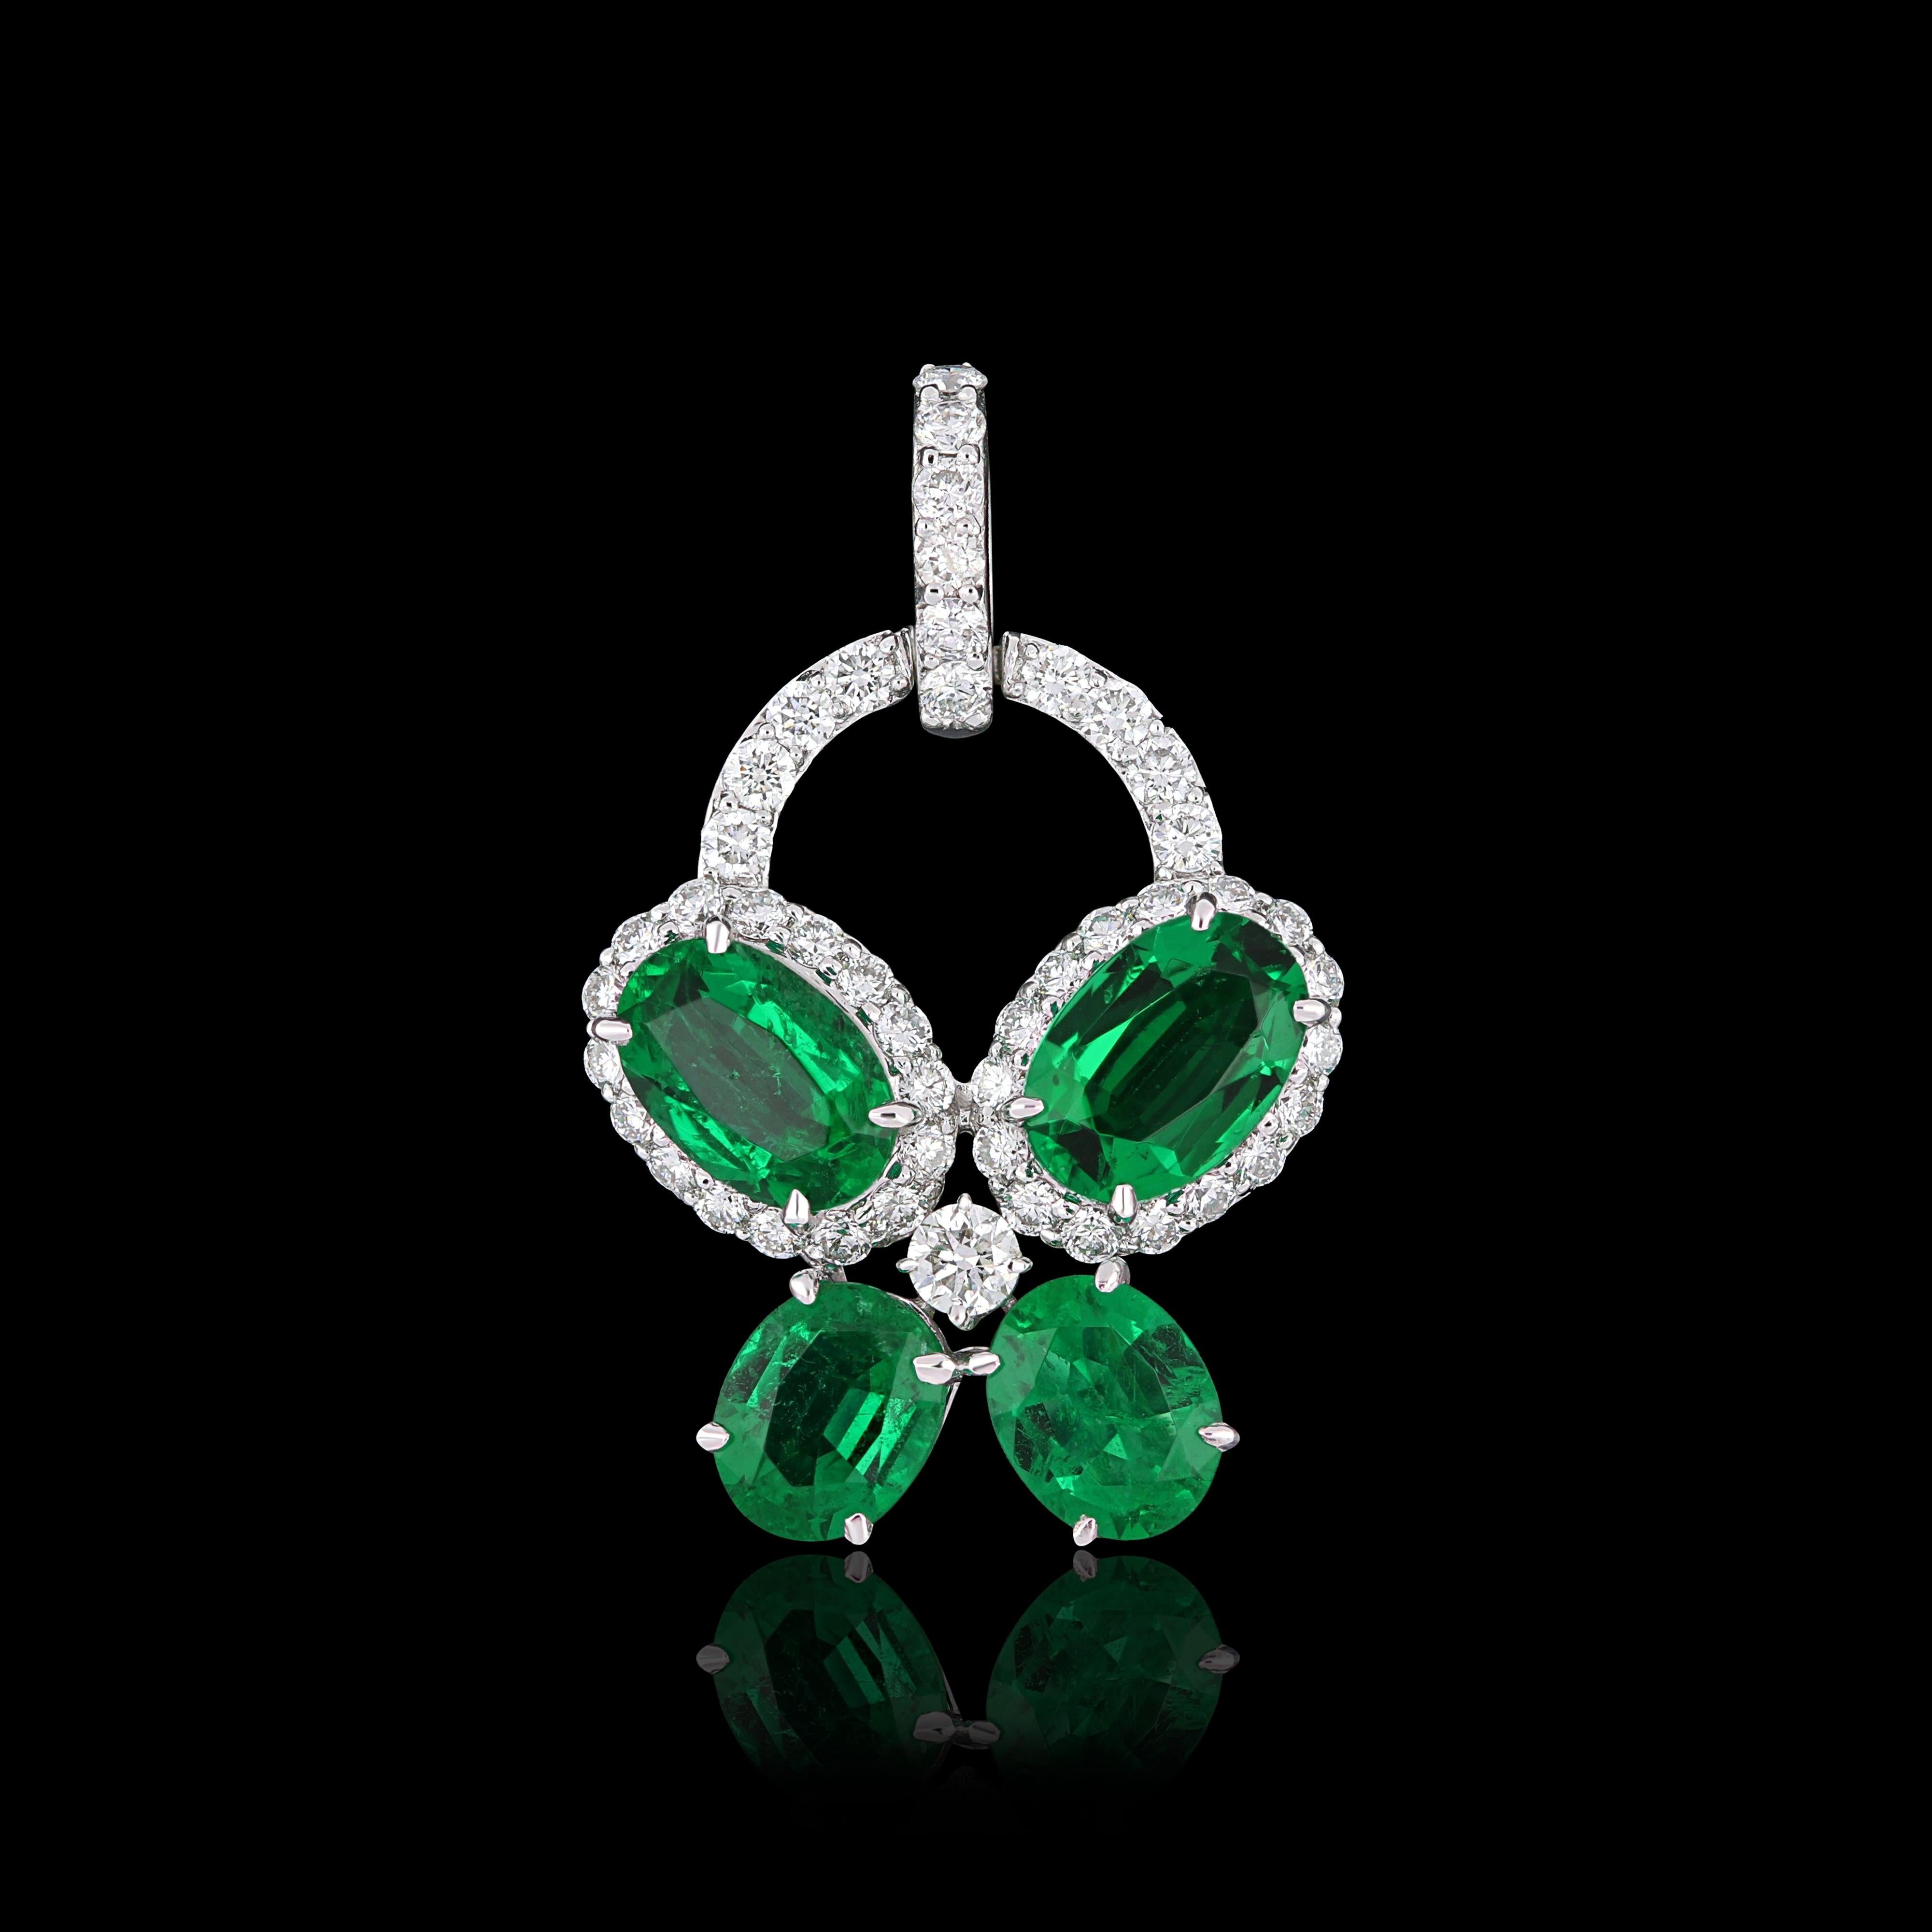 Elegant and exquisitely detailed 18 Karat White Gold Pendant, center set with 1.27 Cts .Oval Shape Emerald and micro pave set Diamonds, weighing approx. 0.36Cts Beautifully Hand crafted in 18 Karat White Gold.

Stone Detail:
Emerald: 6x4MM,